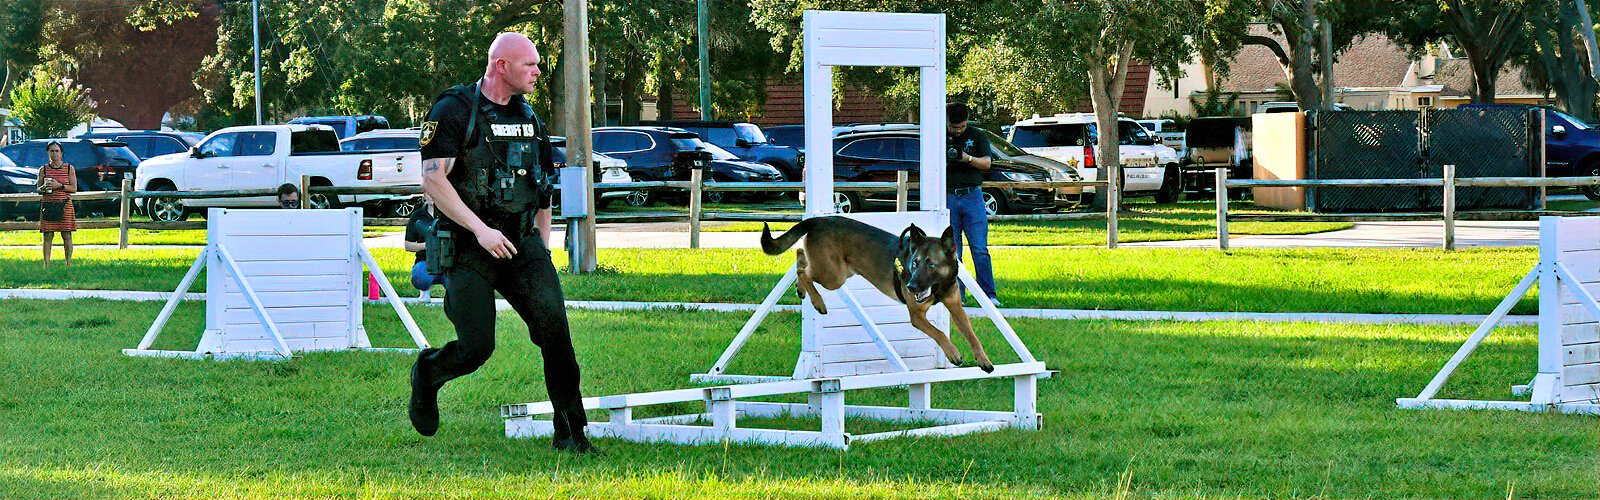 Deputy Richard Bynum and K-9 Rogue demonstrate some of the skills the police dogs develop during their training.